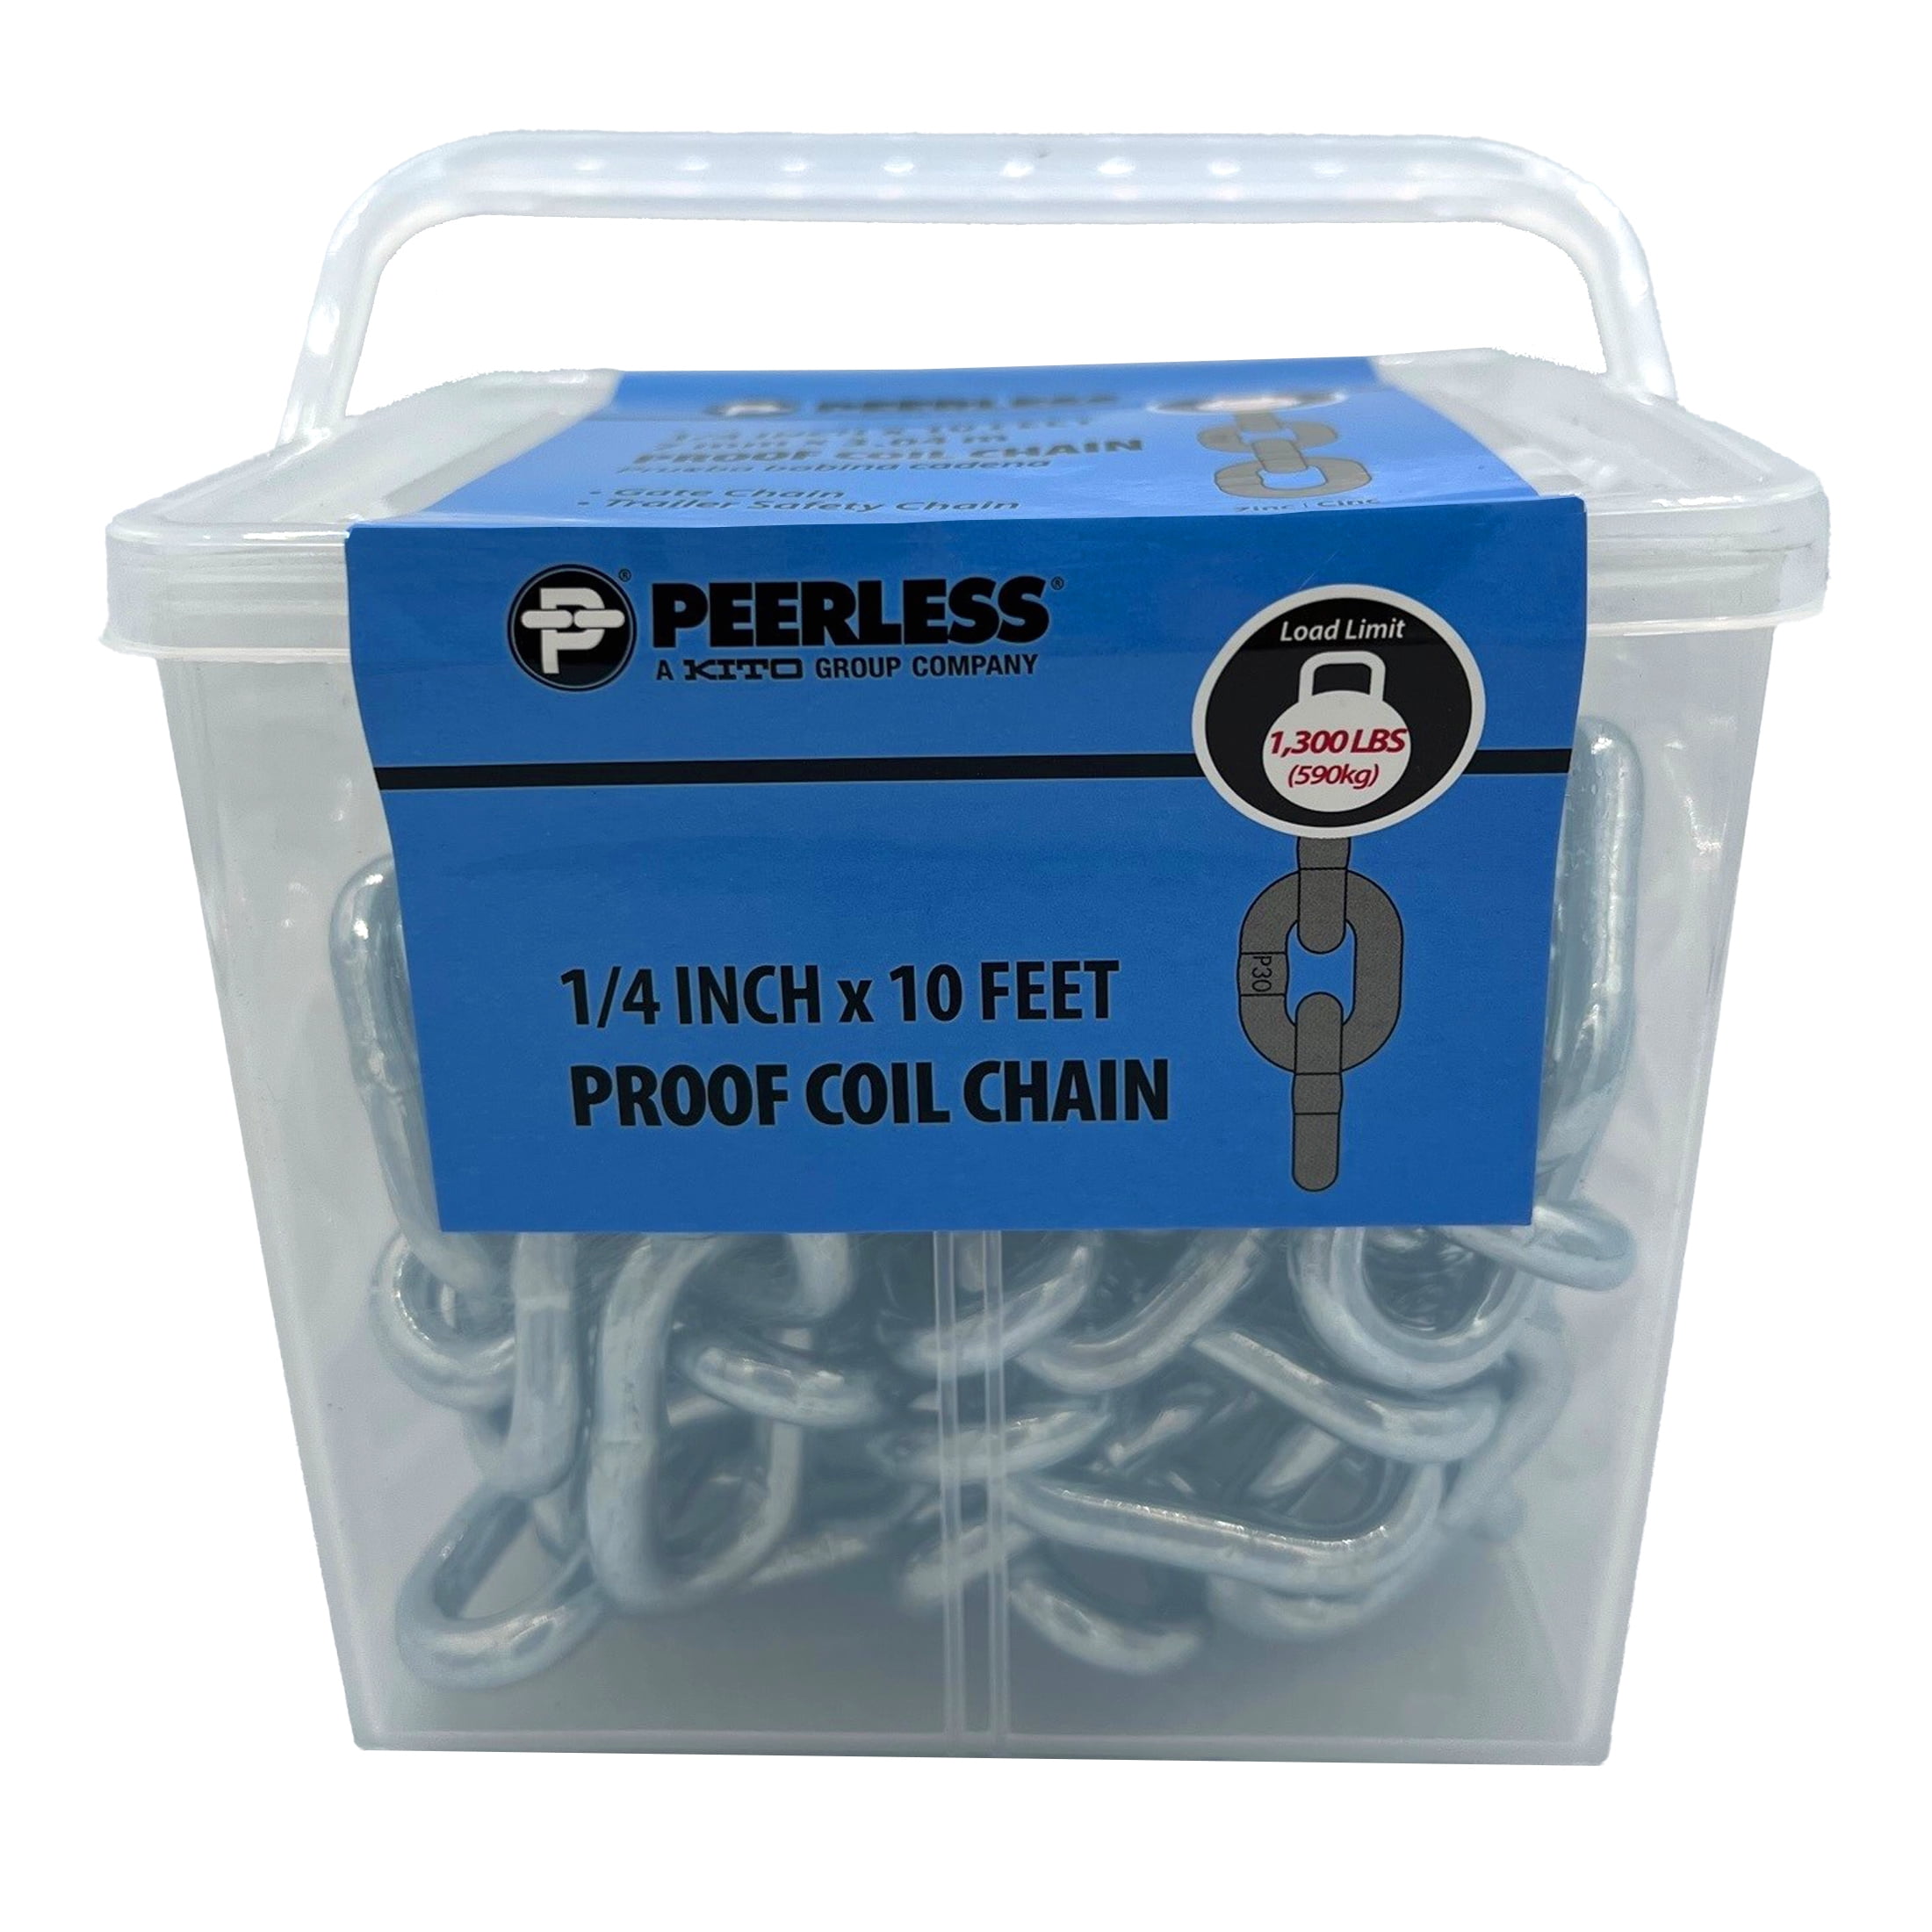 Peerless Chain Tire Chain Cutter 1/4 G30 Proof Coil Capacity, #4101810